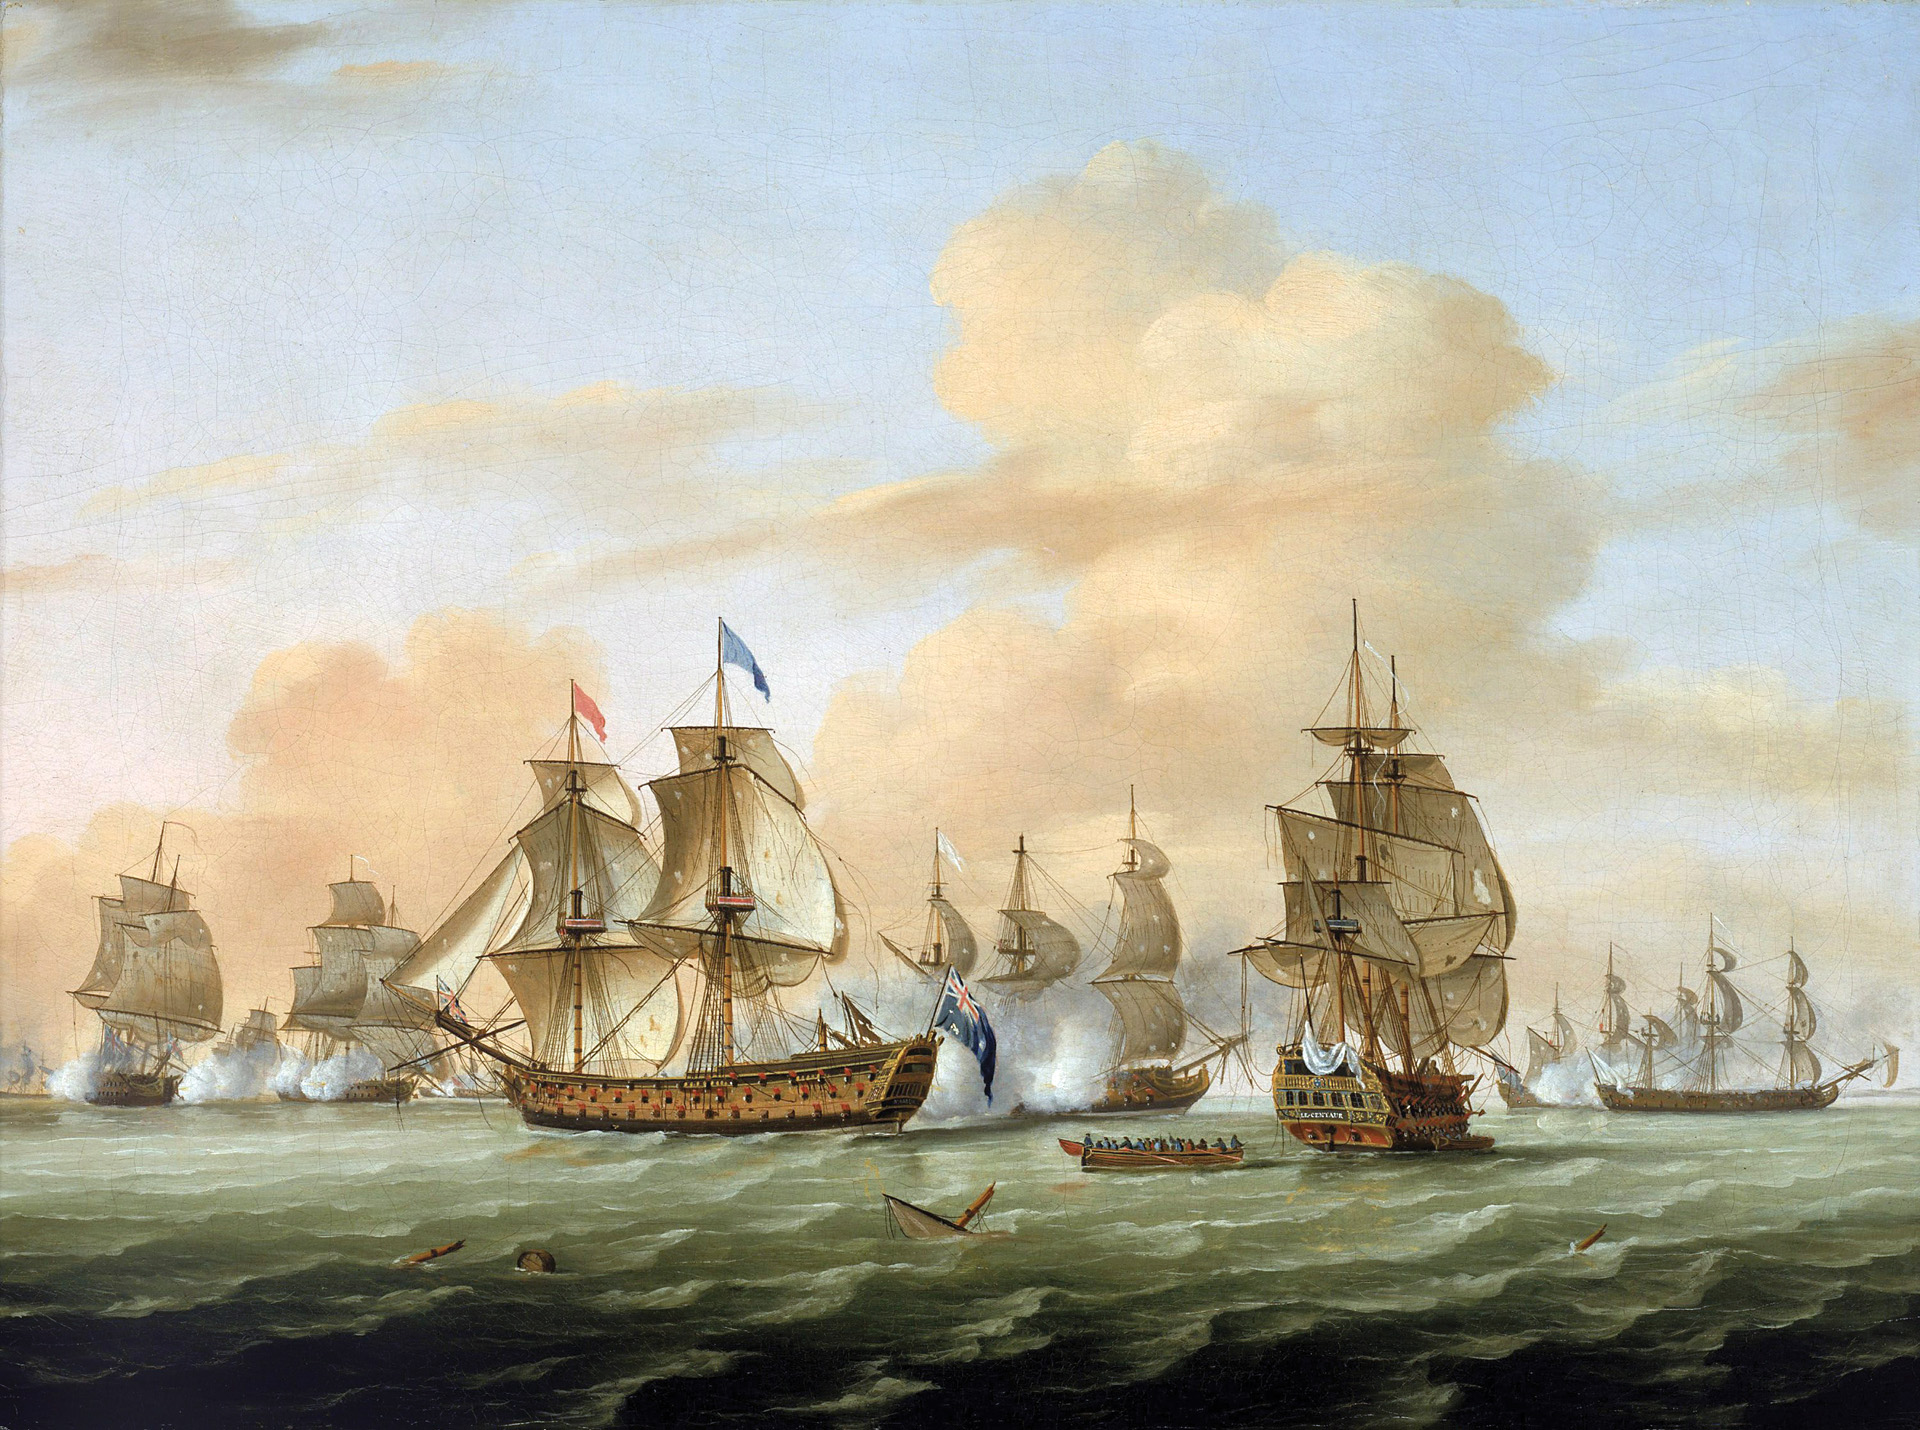 The British fleet caught the French Mediterranean fleet in August 1759 as it sailed north to join the Atlantic fleet in Brest. The ensuing Battle of Lagos cost the French five ships of the line and jeopardized a planned invasion of the British Isles.